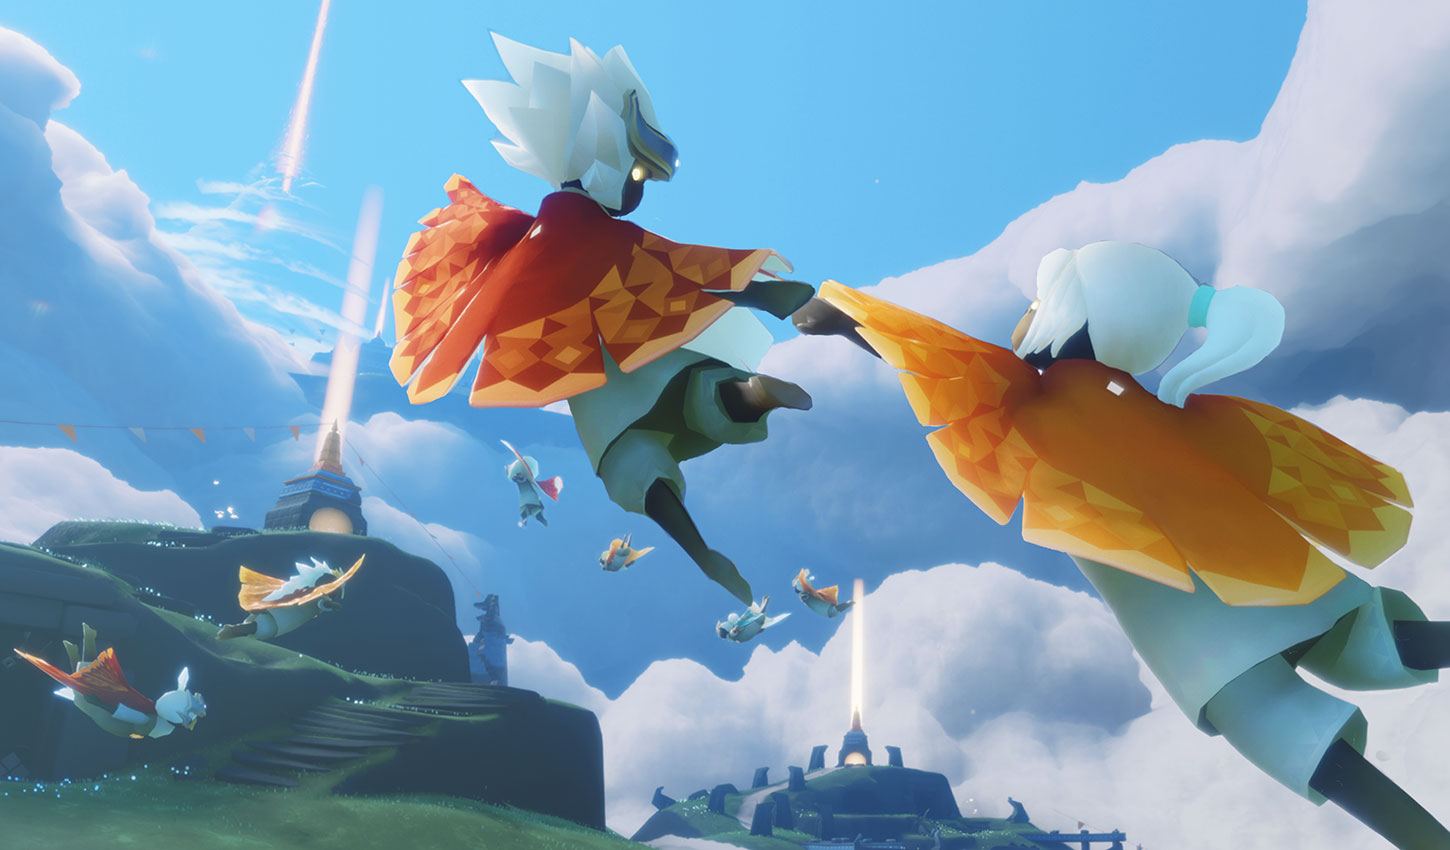 Thatgamecompany's Sky: Children of the Light Soars Past 1 Million Downloads in Less Than Week